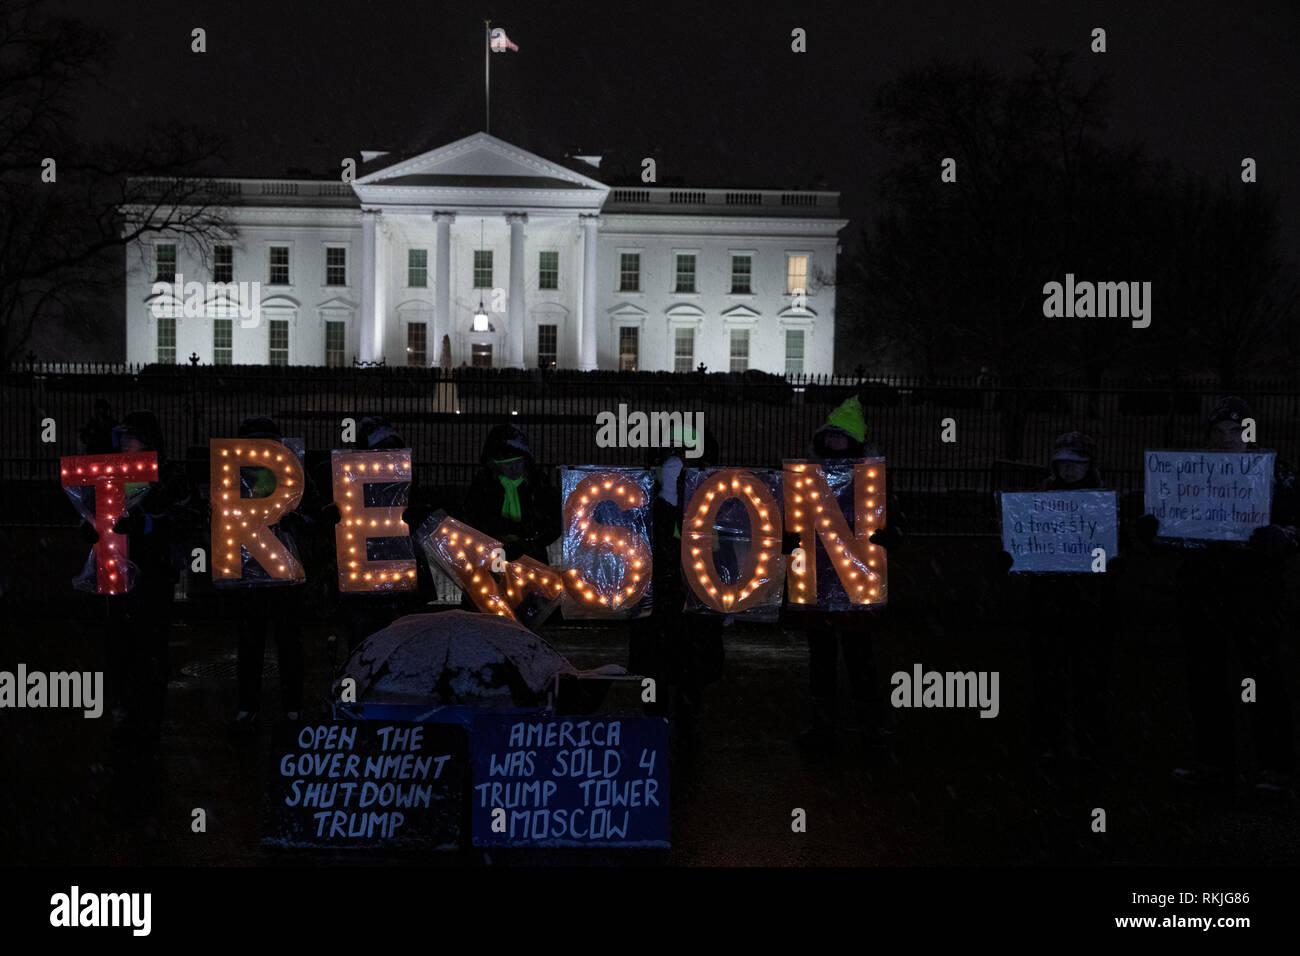 Demonstrators hold illuminated letter signs that read 'Treason' while protesting outside of the White House during the partial government shutdown in Washington, D.C., U.S, on Saturday, Jan. 12, 2019. Stock Photo